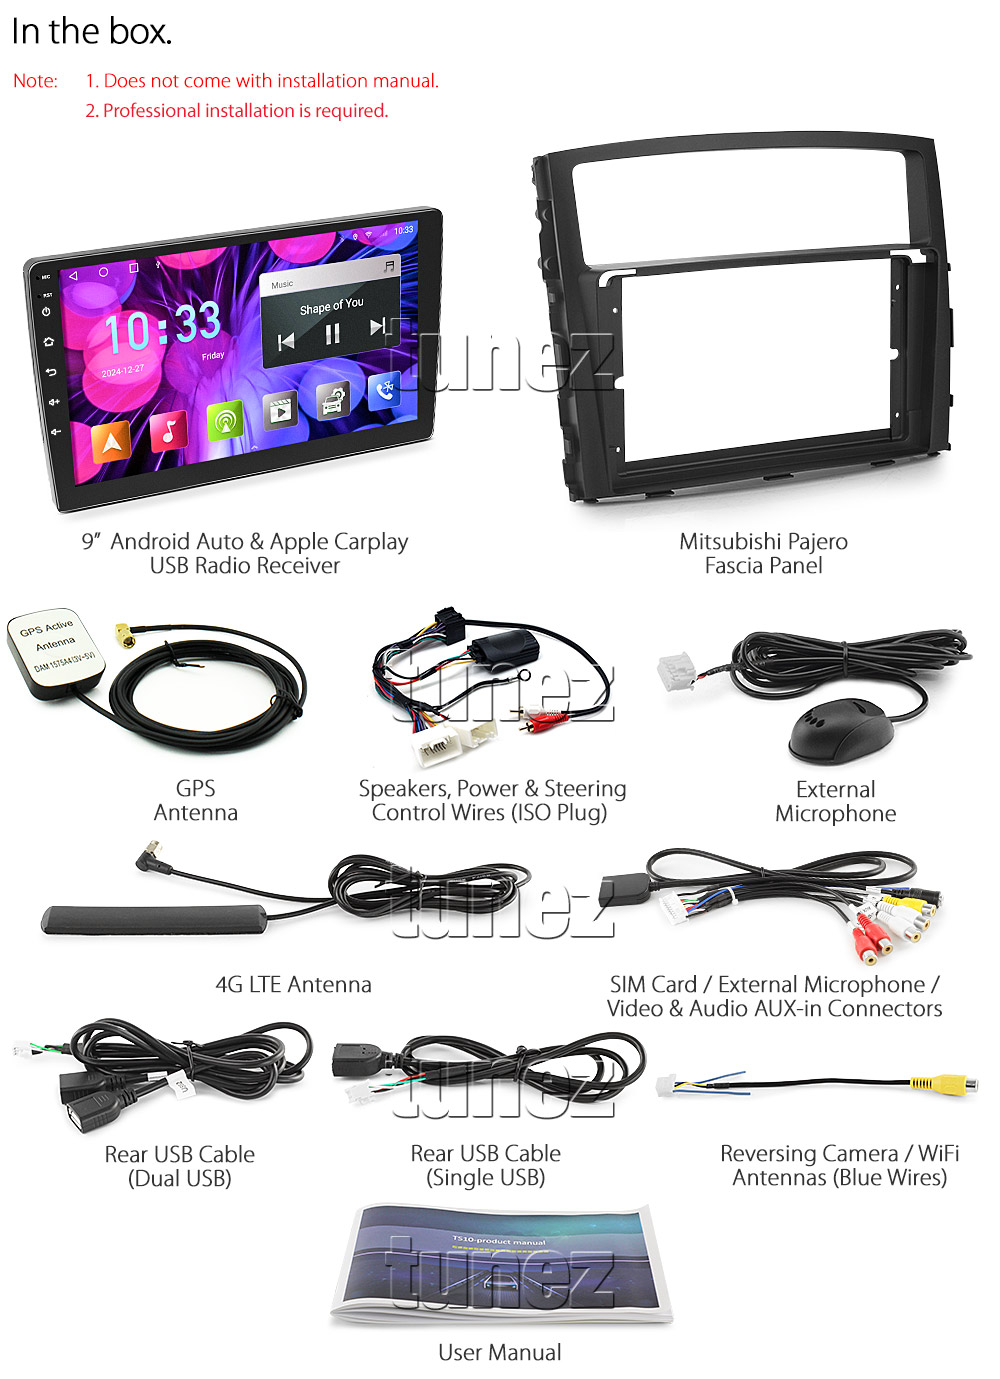 MP08AND GPS Aftermarket Misubishi Pajero Shogun 2006 2007 2008 2009 2010 2011 2012 2013 2014 2015 NS NT NW NX chassis 4th generation gen large 9-inch 9' touchscreen Universal Double DIN Latest Australia UK European USA Original CarPlay Android Auto 10 Car USB player radio stereo 4G LTE WiFi head unit details Aftermarket External and Internal Microphone Bluetooth Europe Sat Nav Navi Plug and Play ISO Plug Wiring Harness Matching Fascia Kit Facia Free Reversing Camera Album Art ID3 Tag RMVB MP3 MP4 AVI MKV Full High Definition FHD MyLink My Link 1080p DAB+ Digital Radio DAB + Connects2 CTSMT007.2 CTSMT003.2